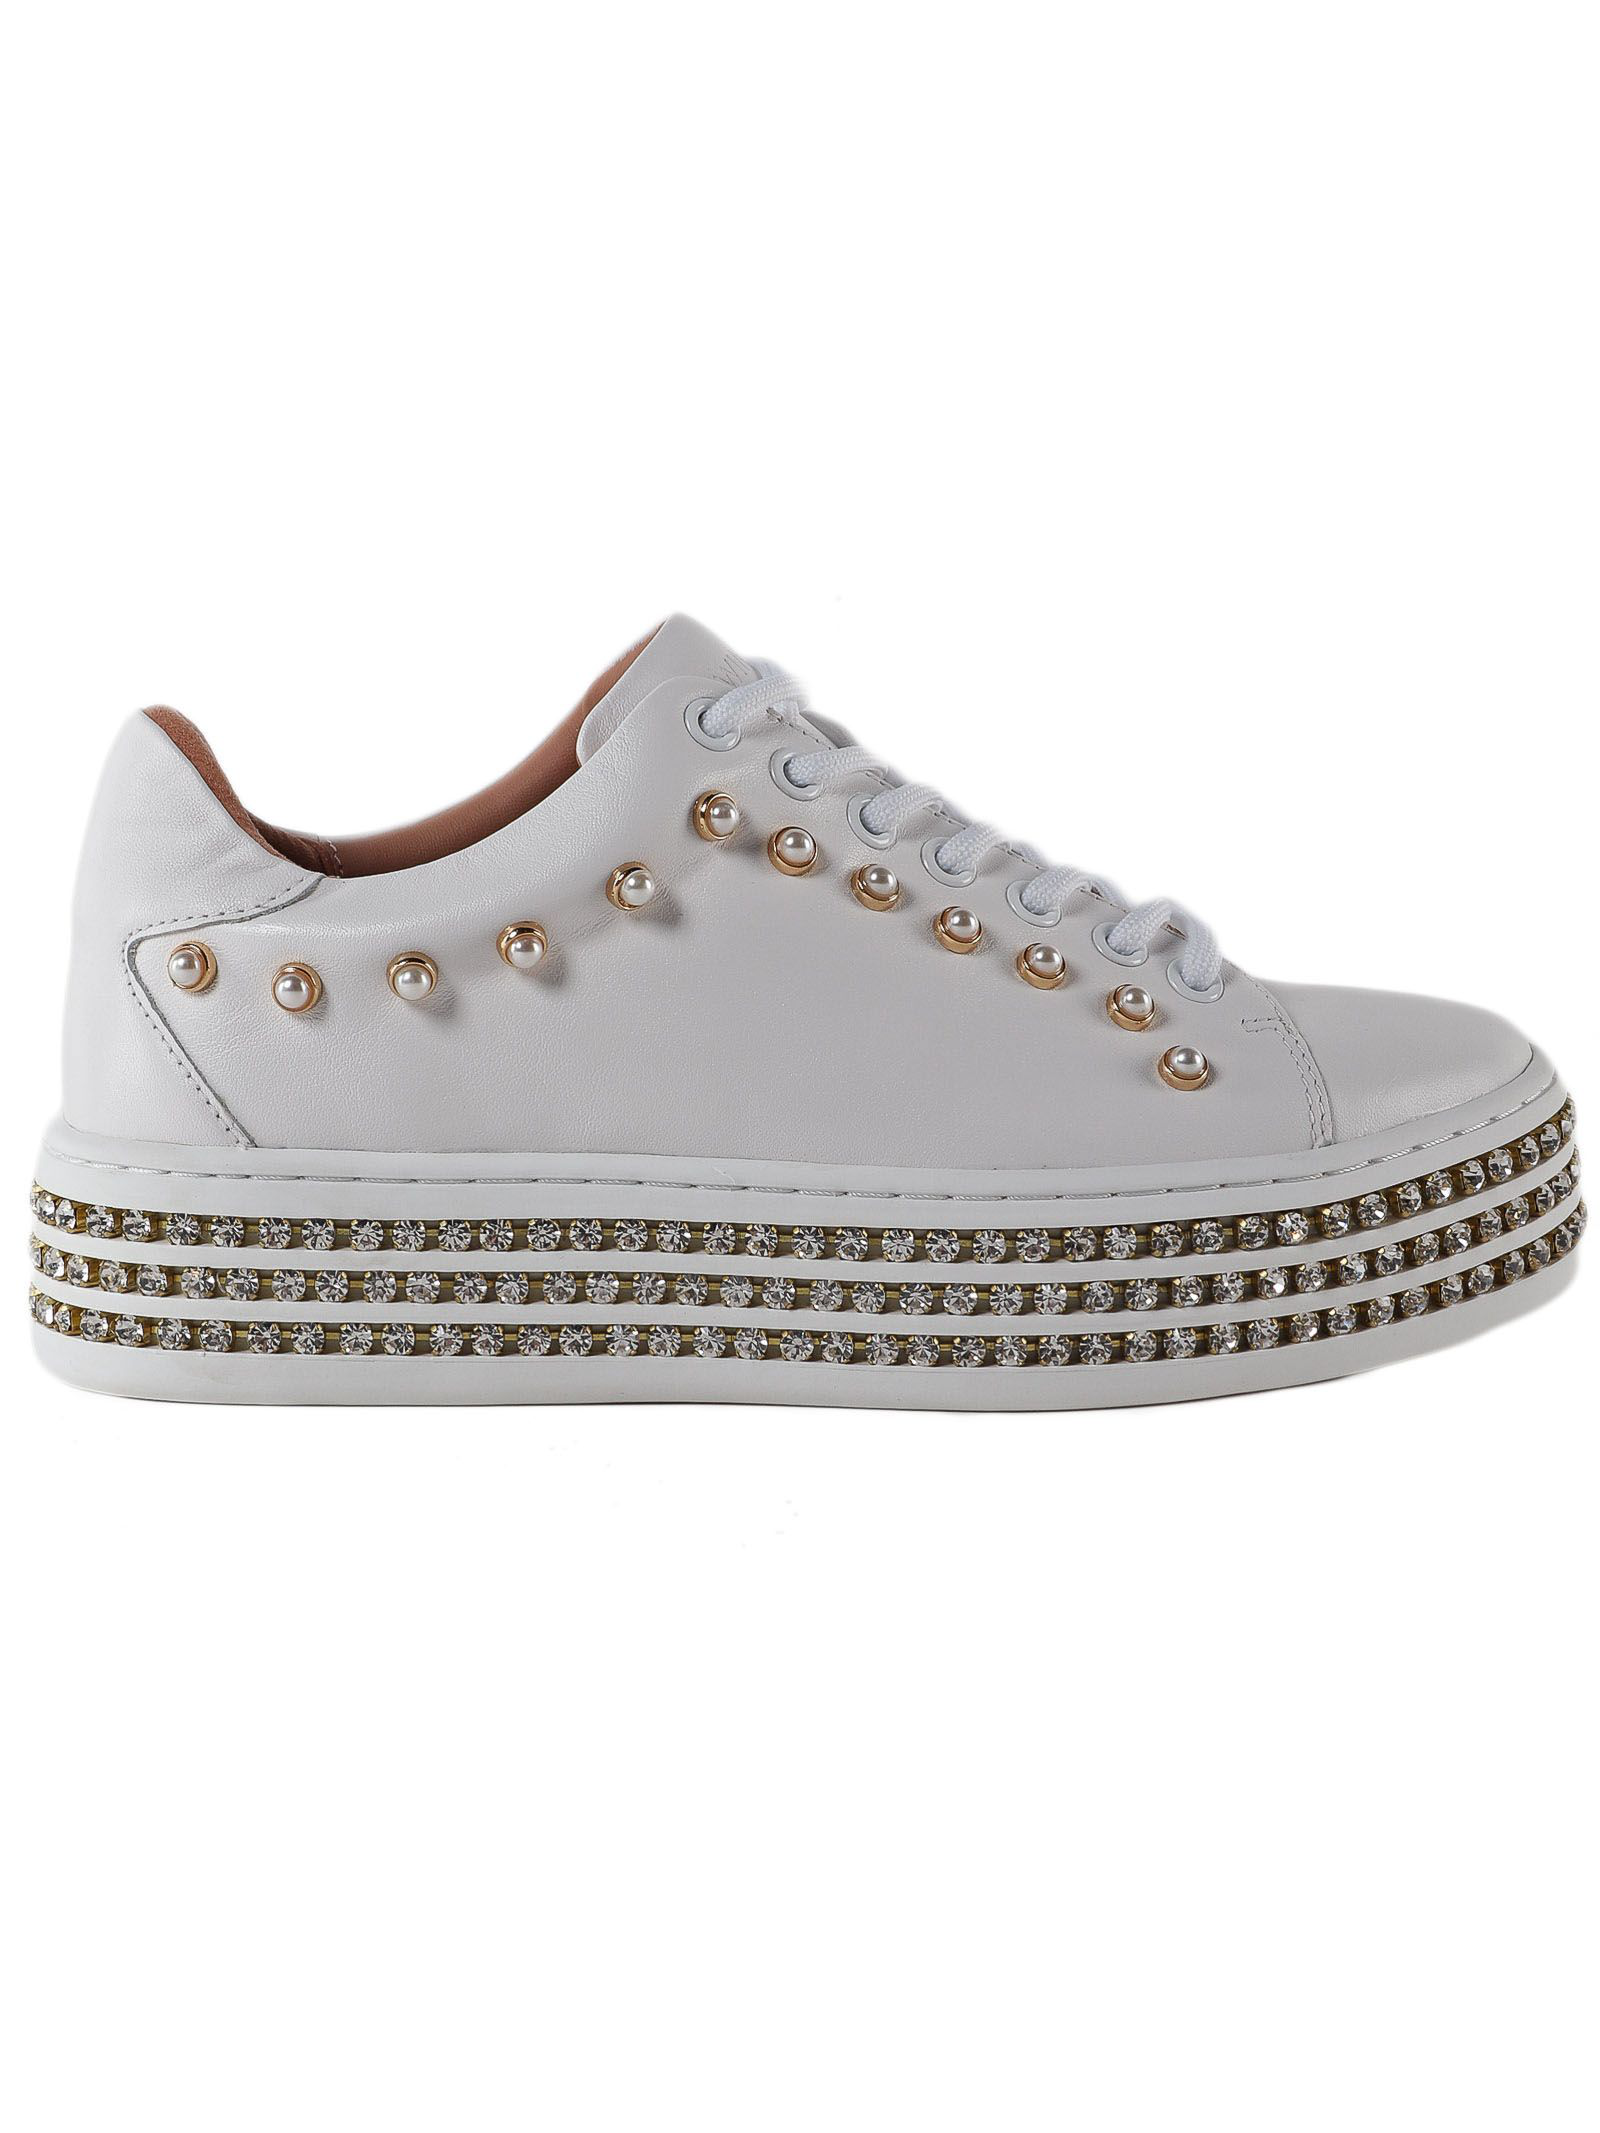 Twinset Twin Set Studded Sneakers In Bianco Ottico | ModeSens